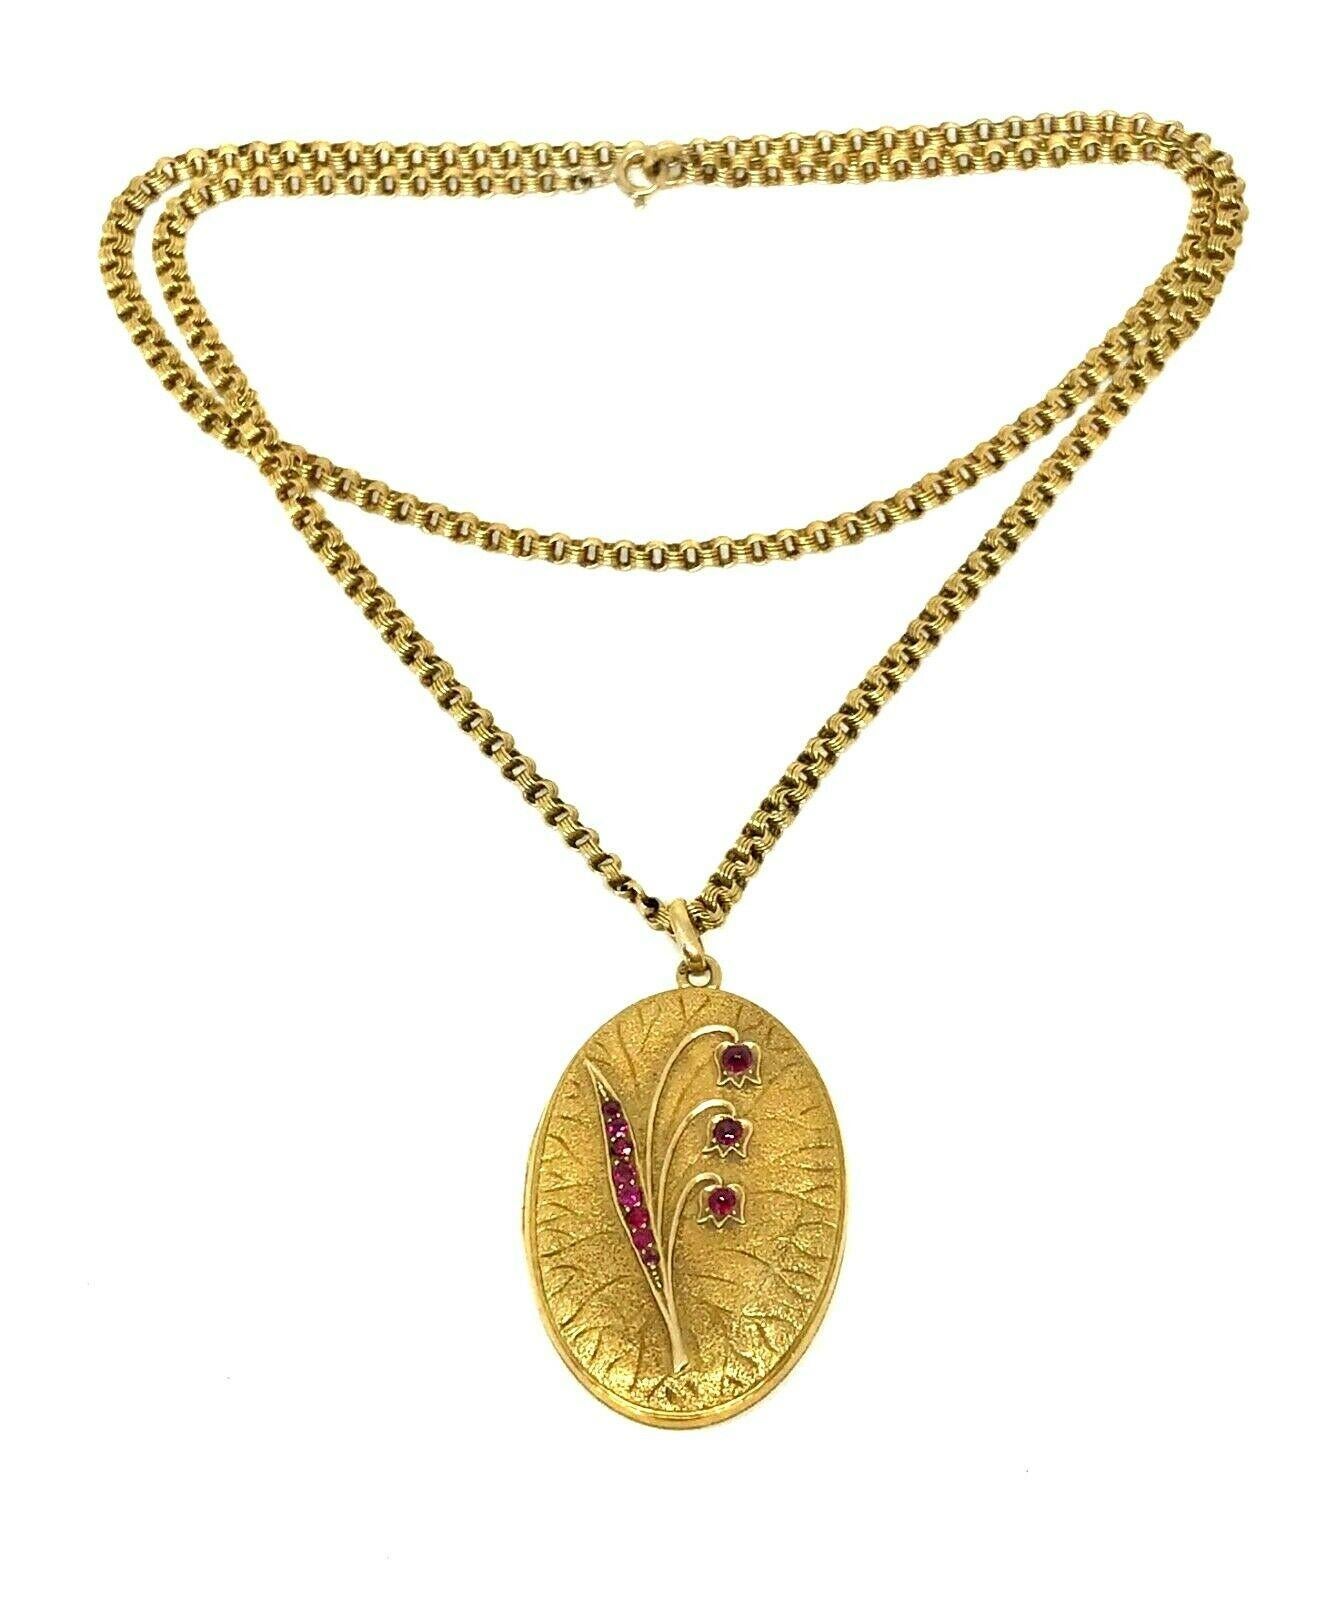 Beautiful antique (circa early 1900s) Russian chain necklace with a locket pendant, both made of 10k yellow gold. The locket features eleven rubies accentuating the lily of the valley image: three cabochon and eight round cut.
Measurements: the